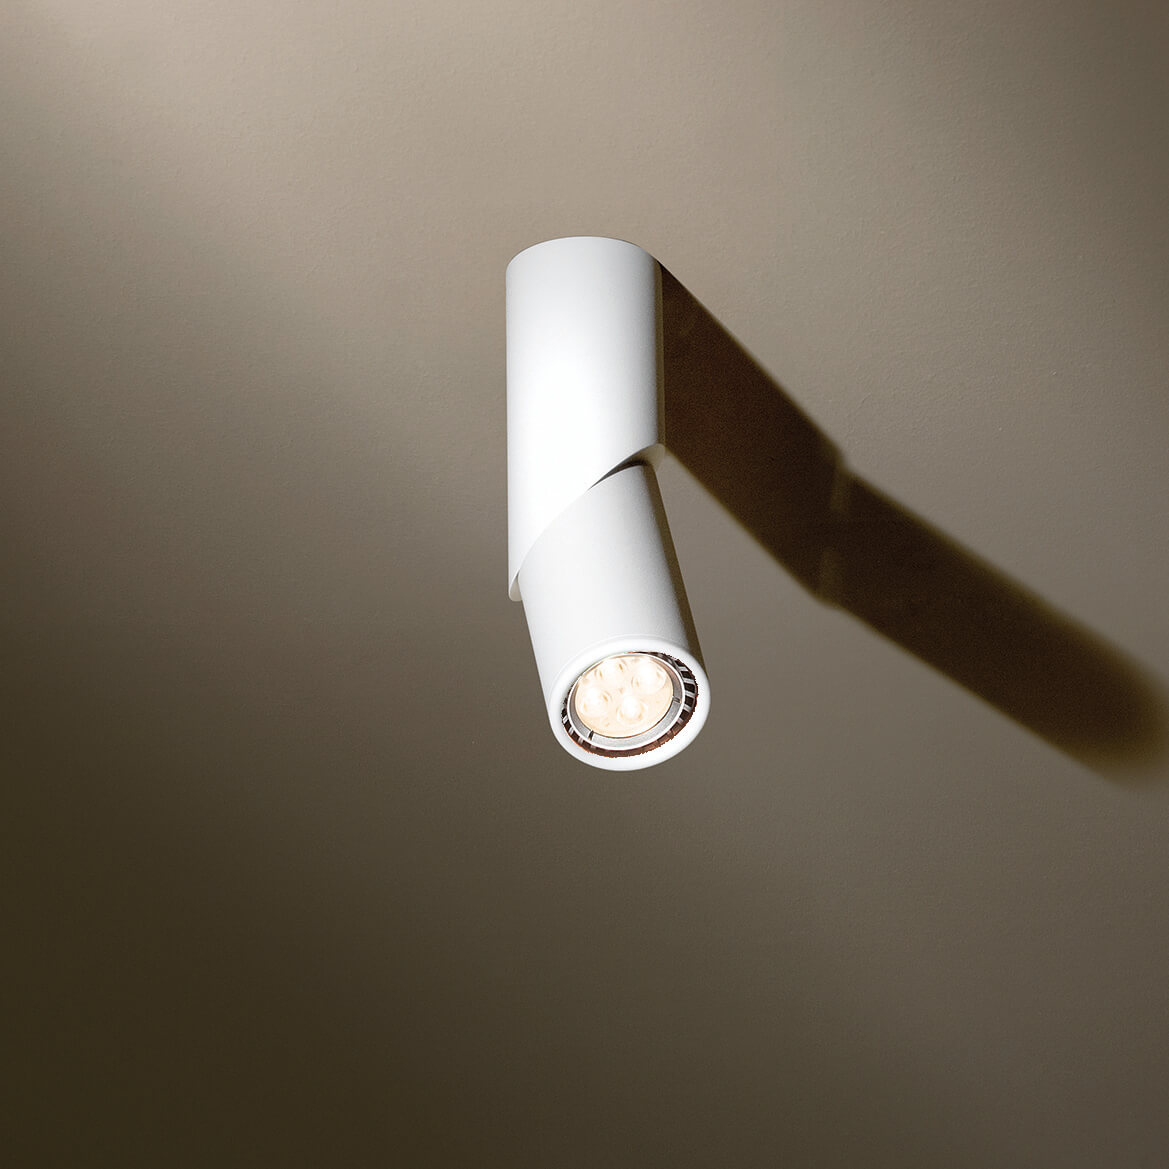 TAL - Mini Scoop Deimos designed to diffuse the light the